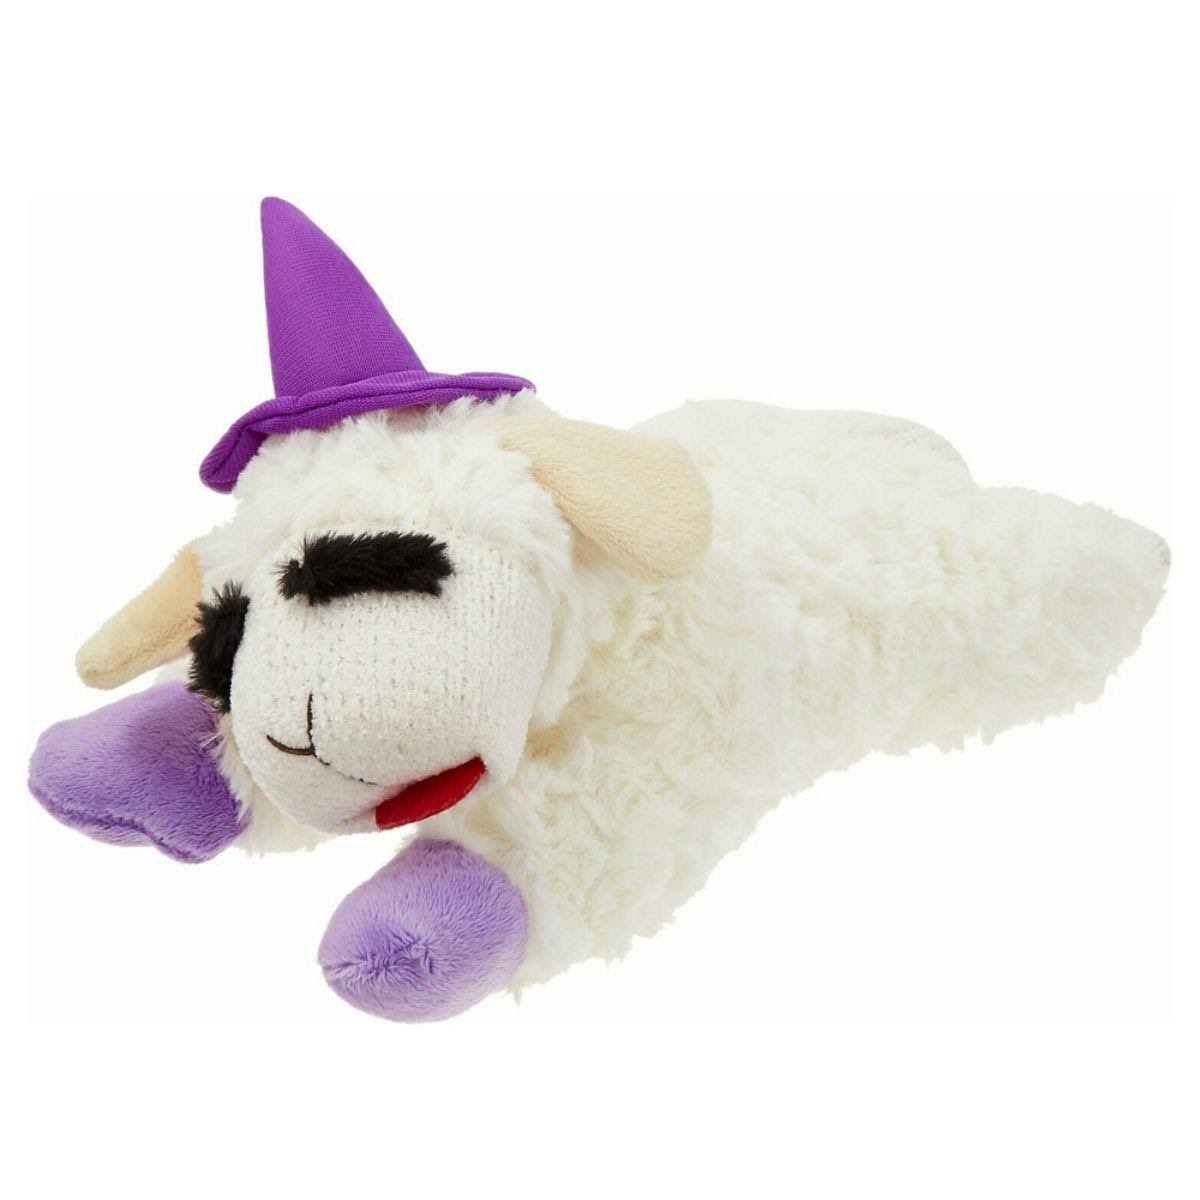 Multipet Halloween Lamb Chop Dog Toy - Purple Witches Hat - Small